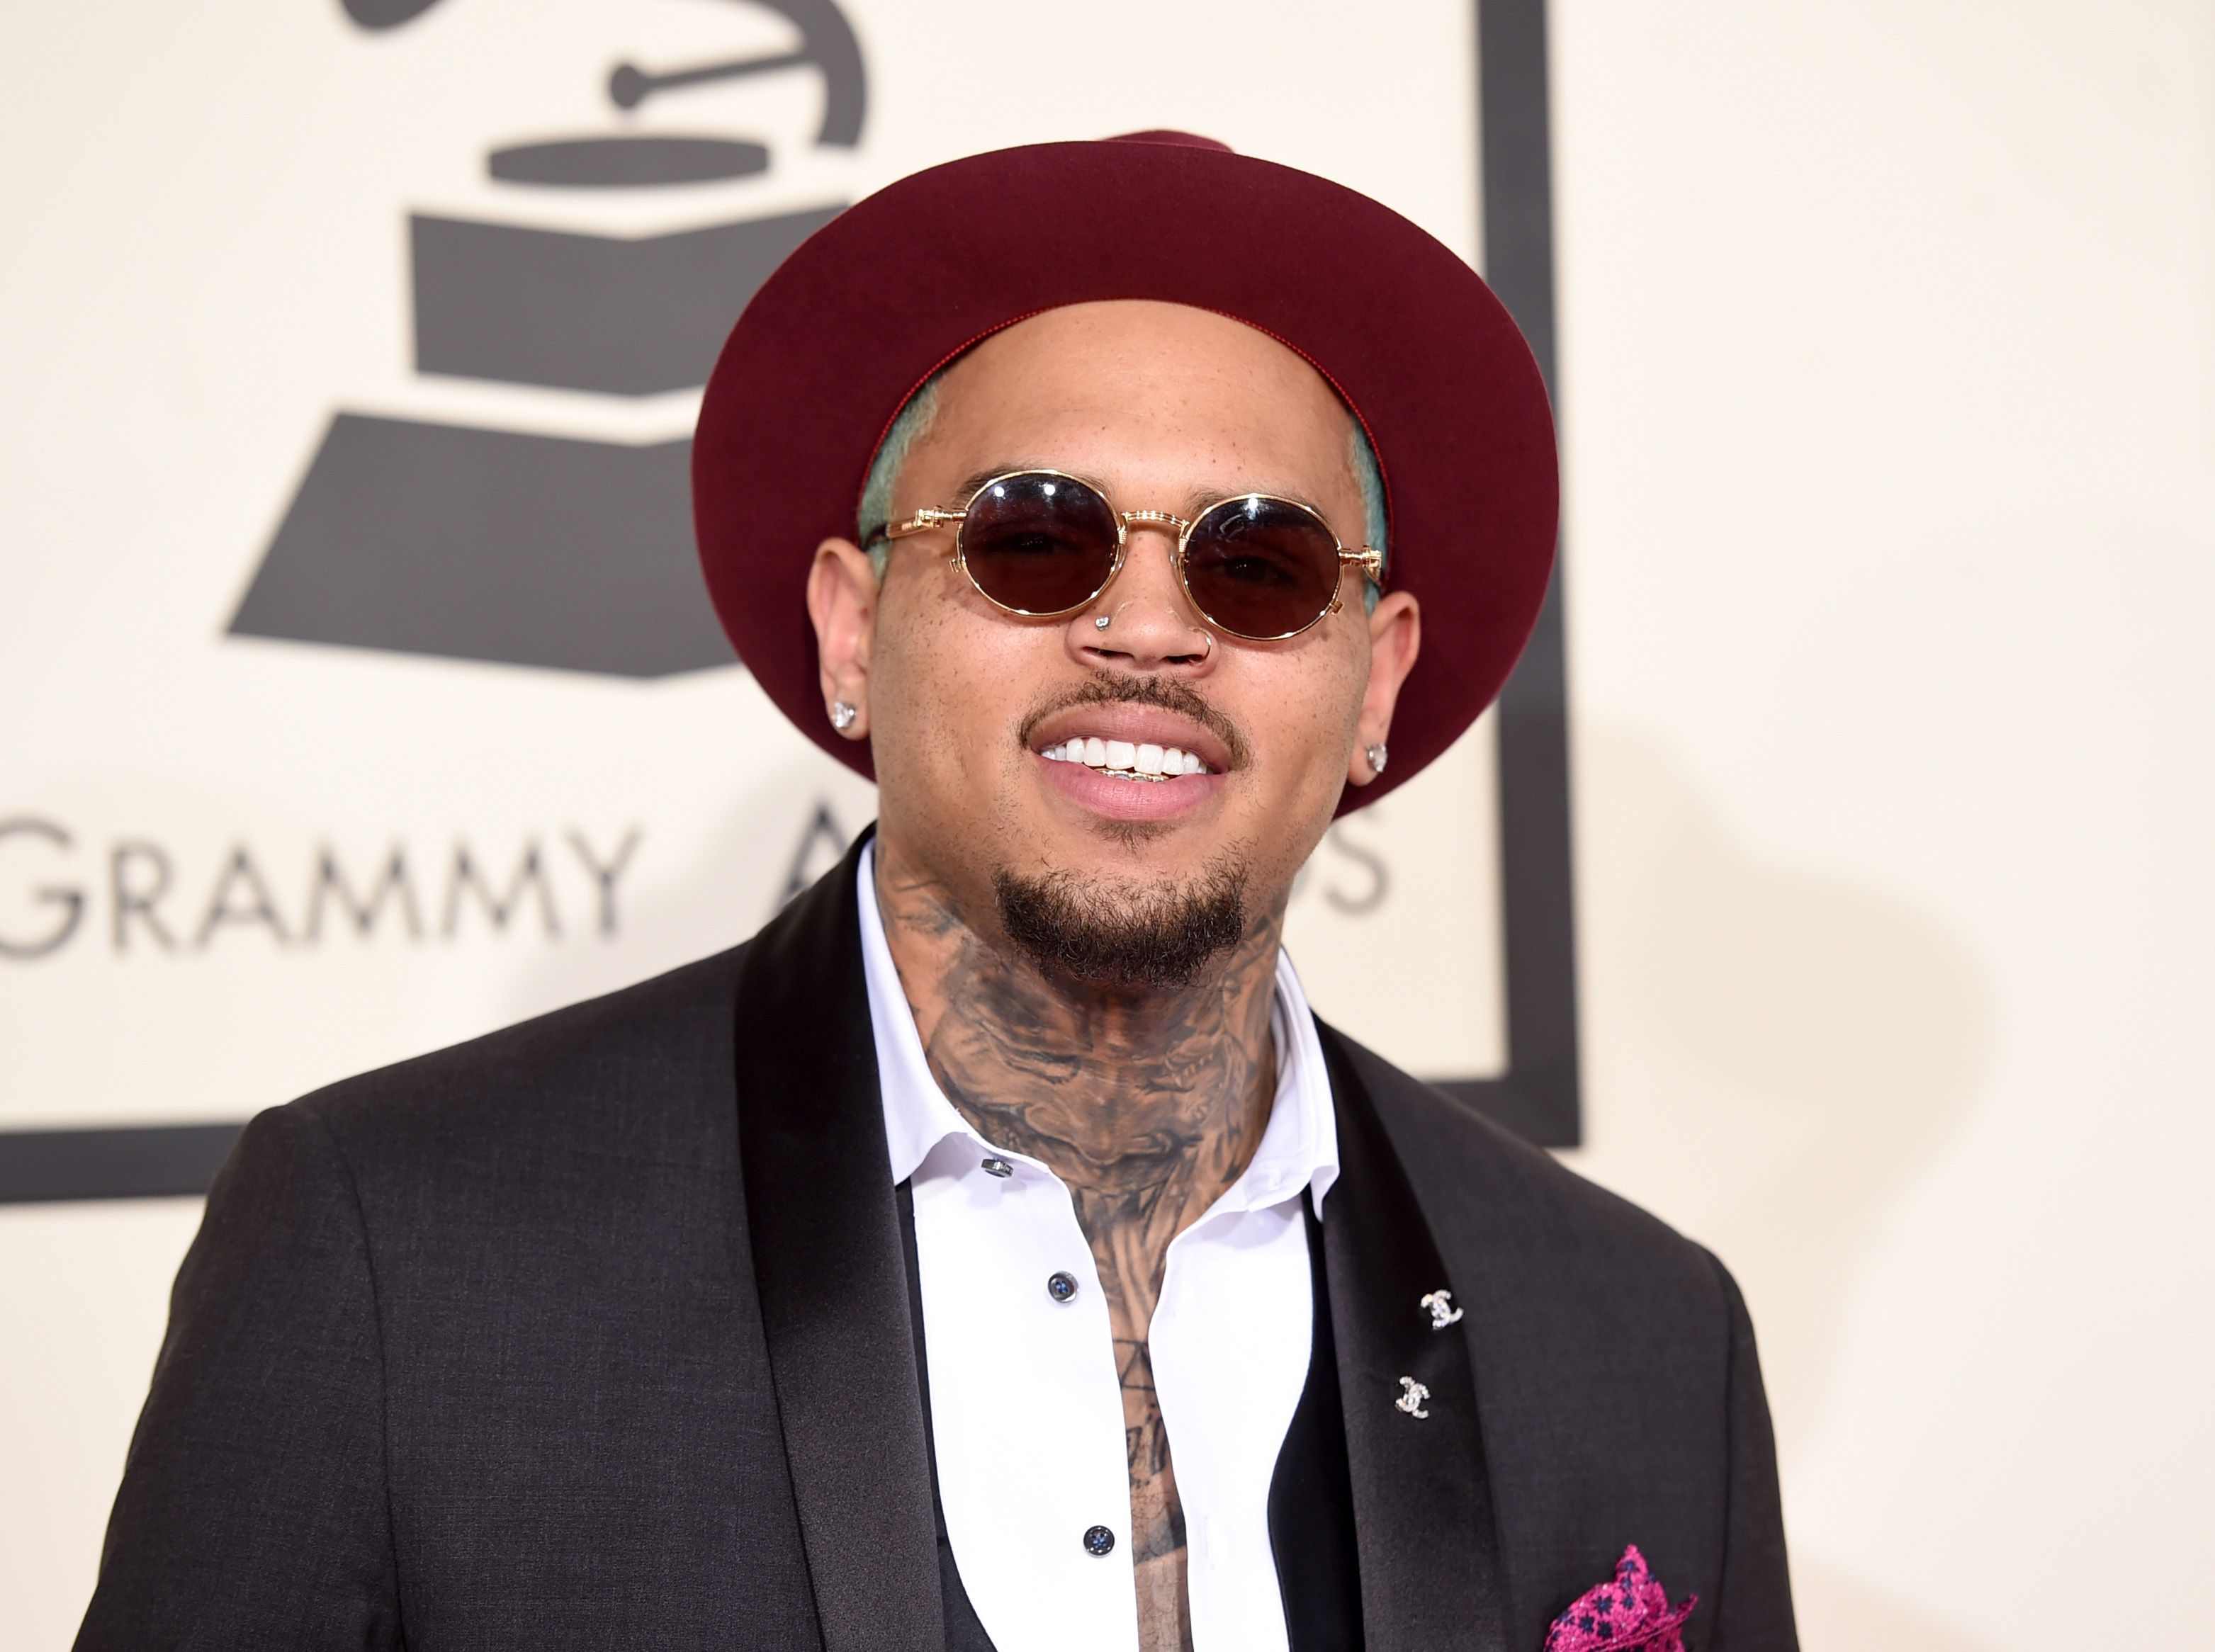 Singer Chris Brown at the 57th Annual Grammy Awards at the Staples Center on February 8, 2015. | Photo: Getty Images